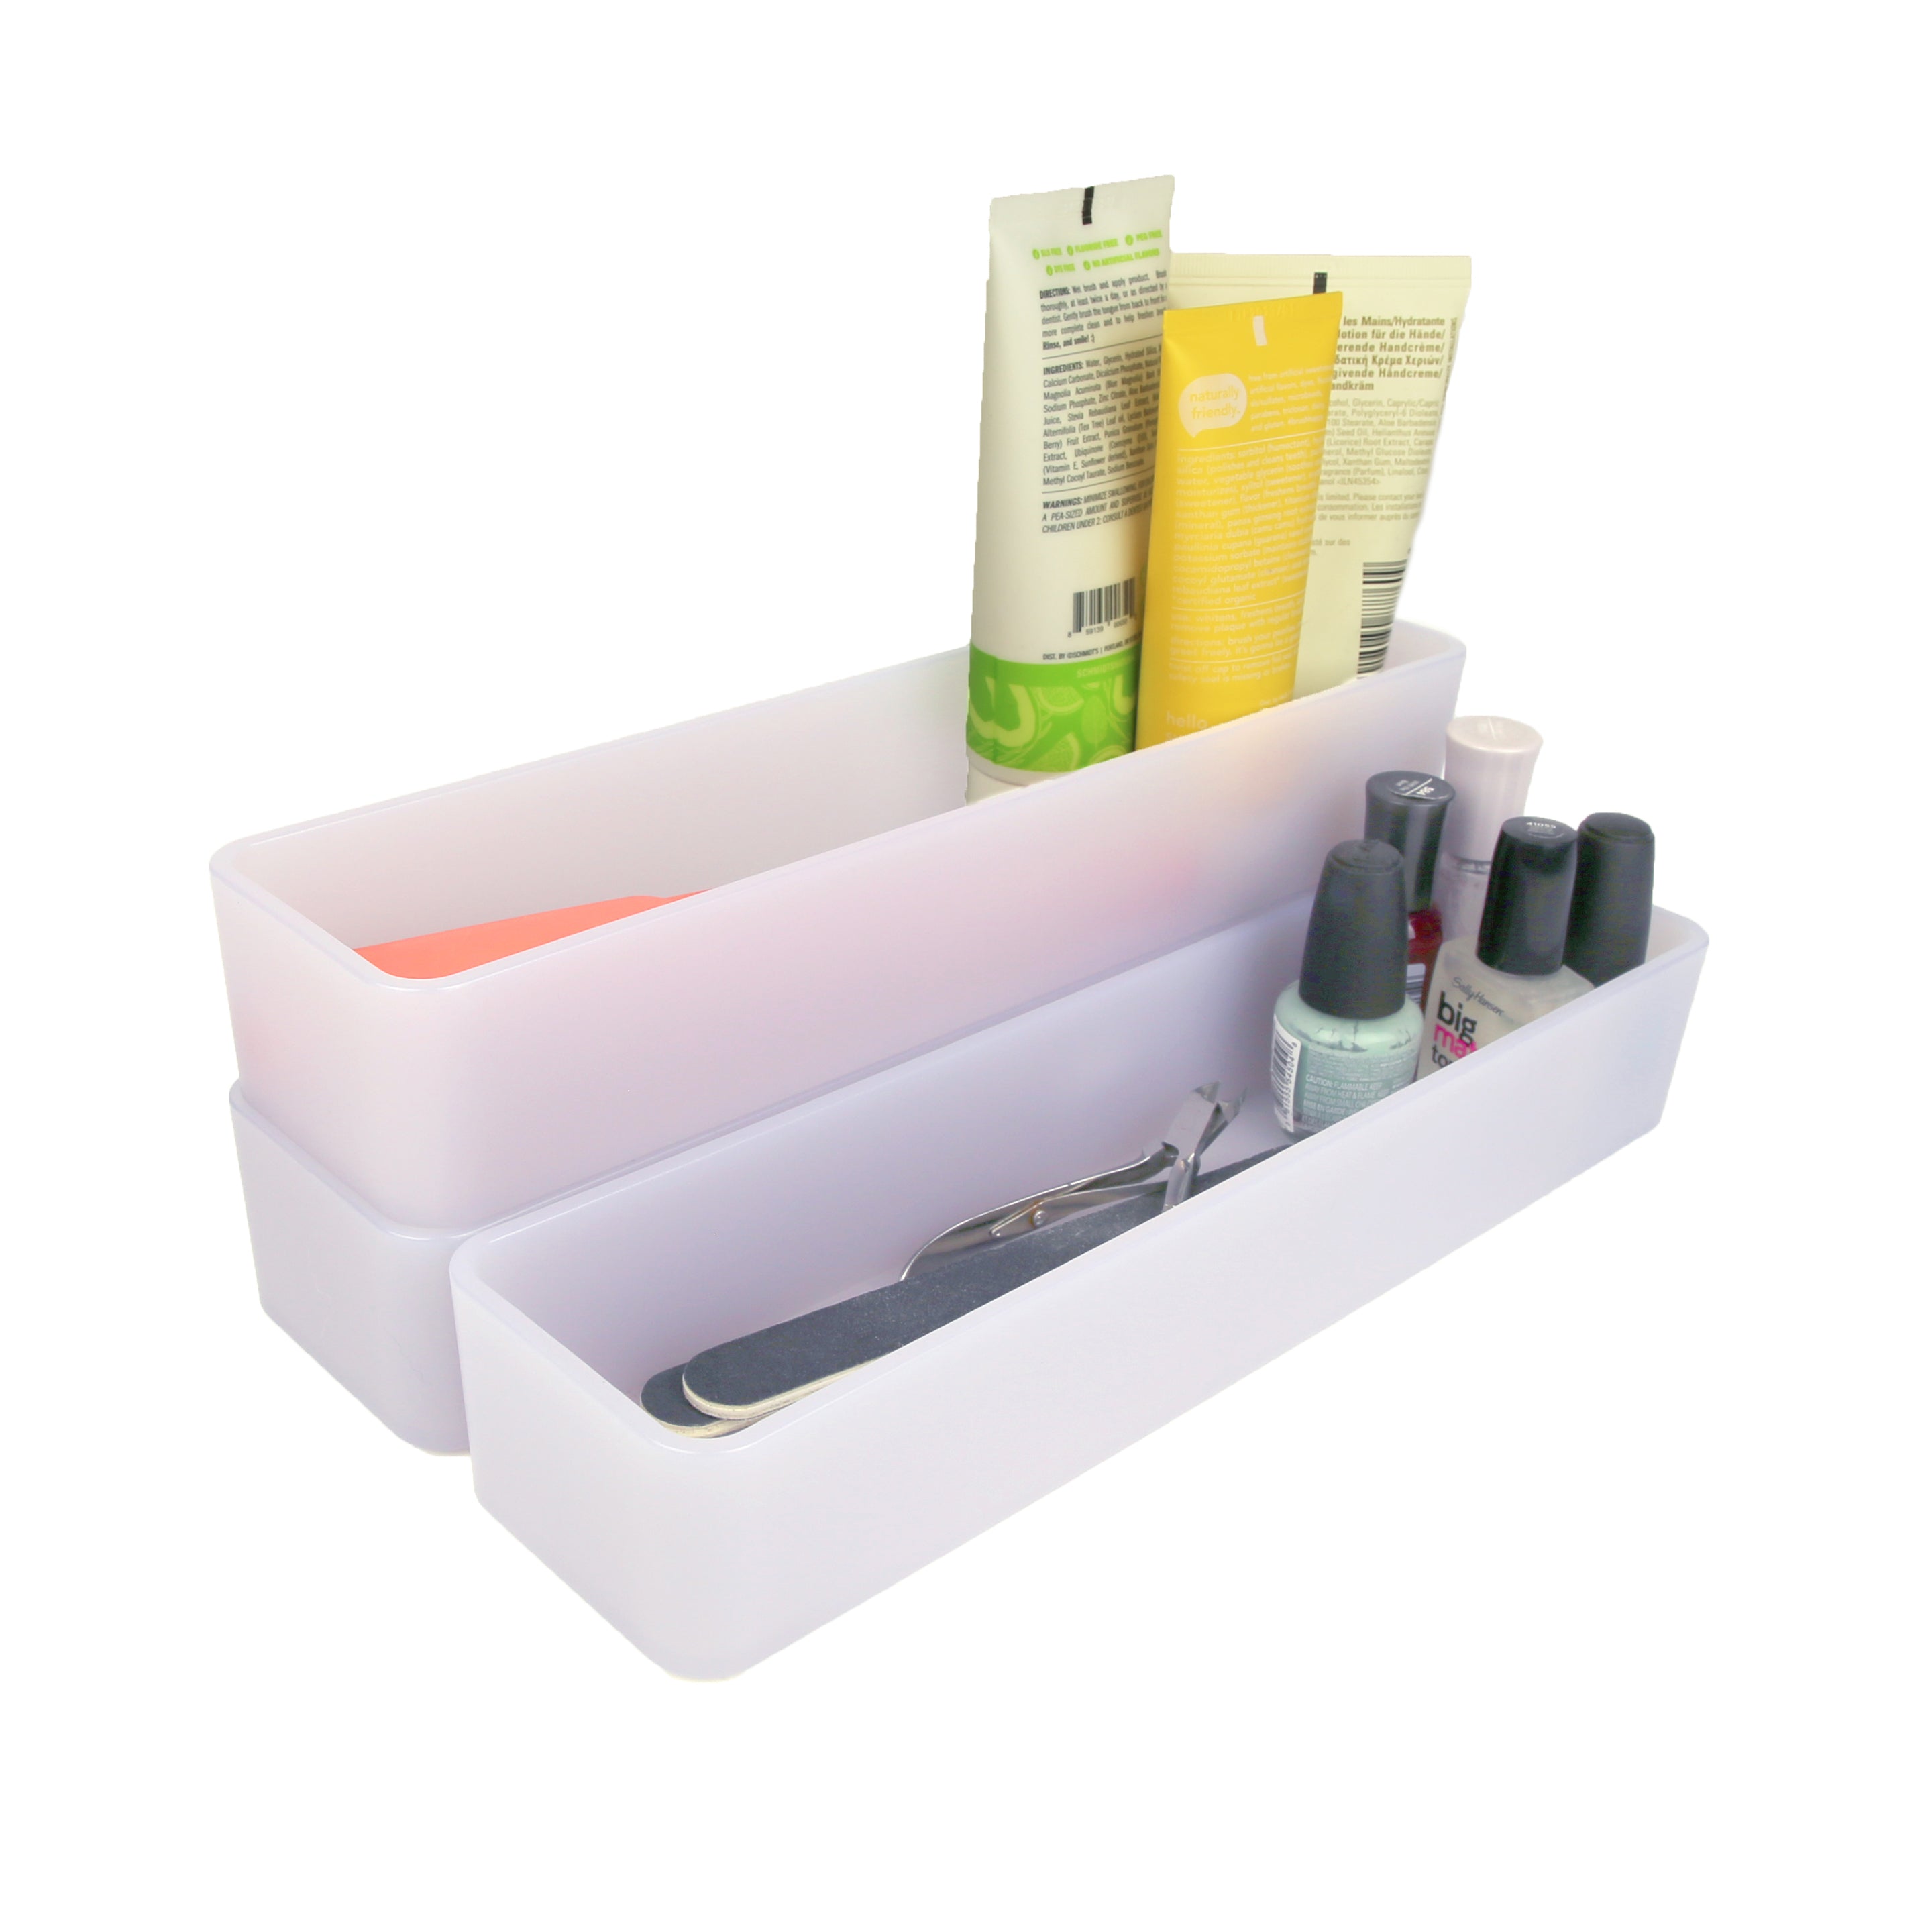 reSTAK recycled stackable organizing bins set of 3 3x12